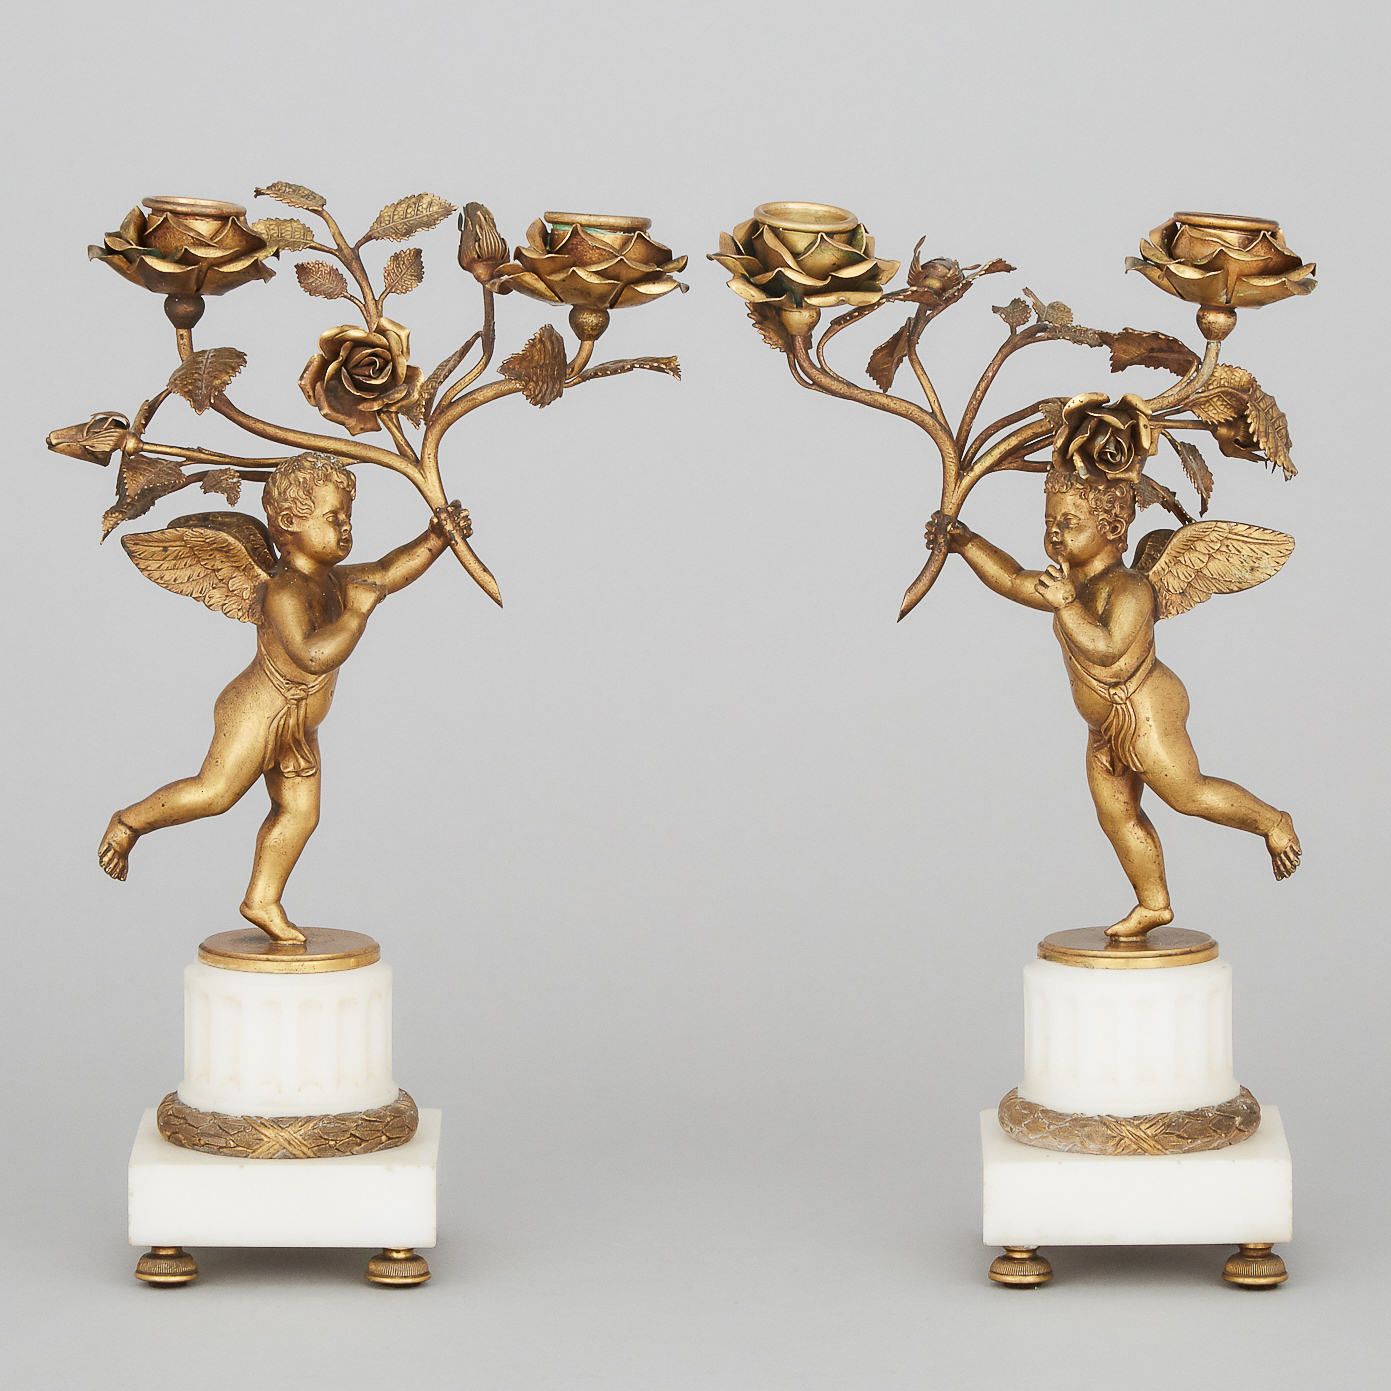 Pair of Louis XVI Style Gilt Bronze and Marble Figural Candlesticks, c.1900